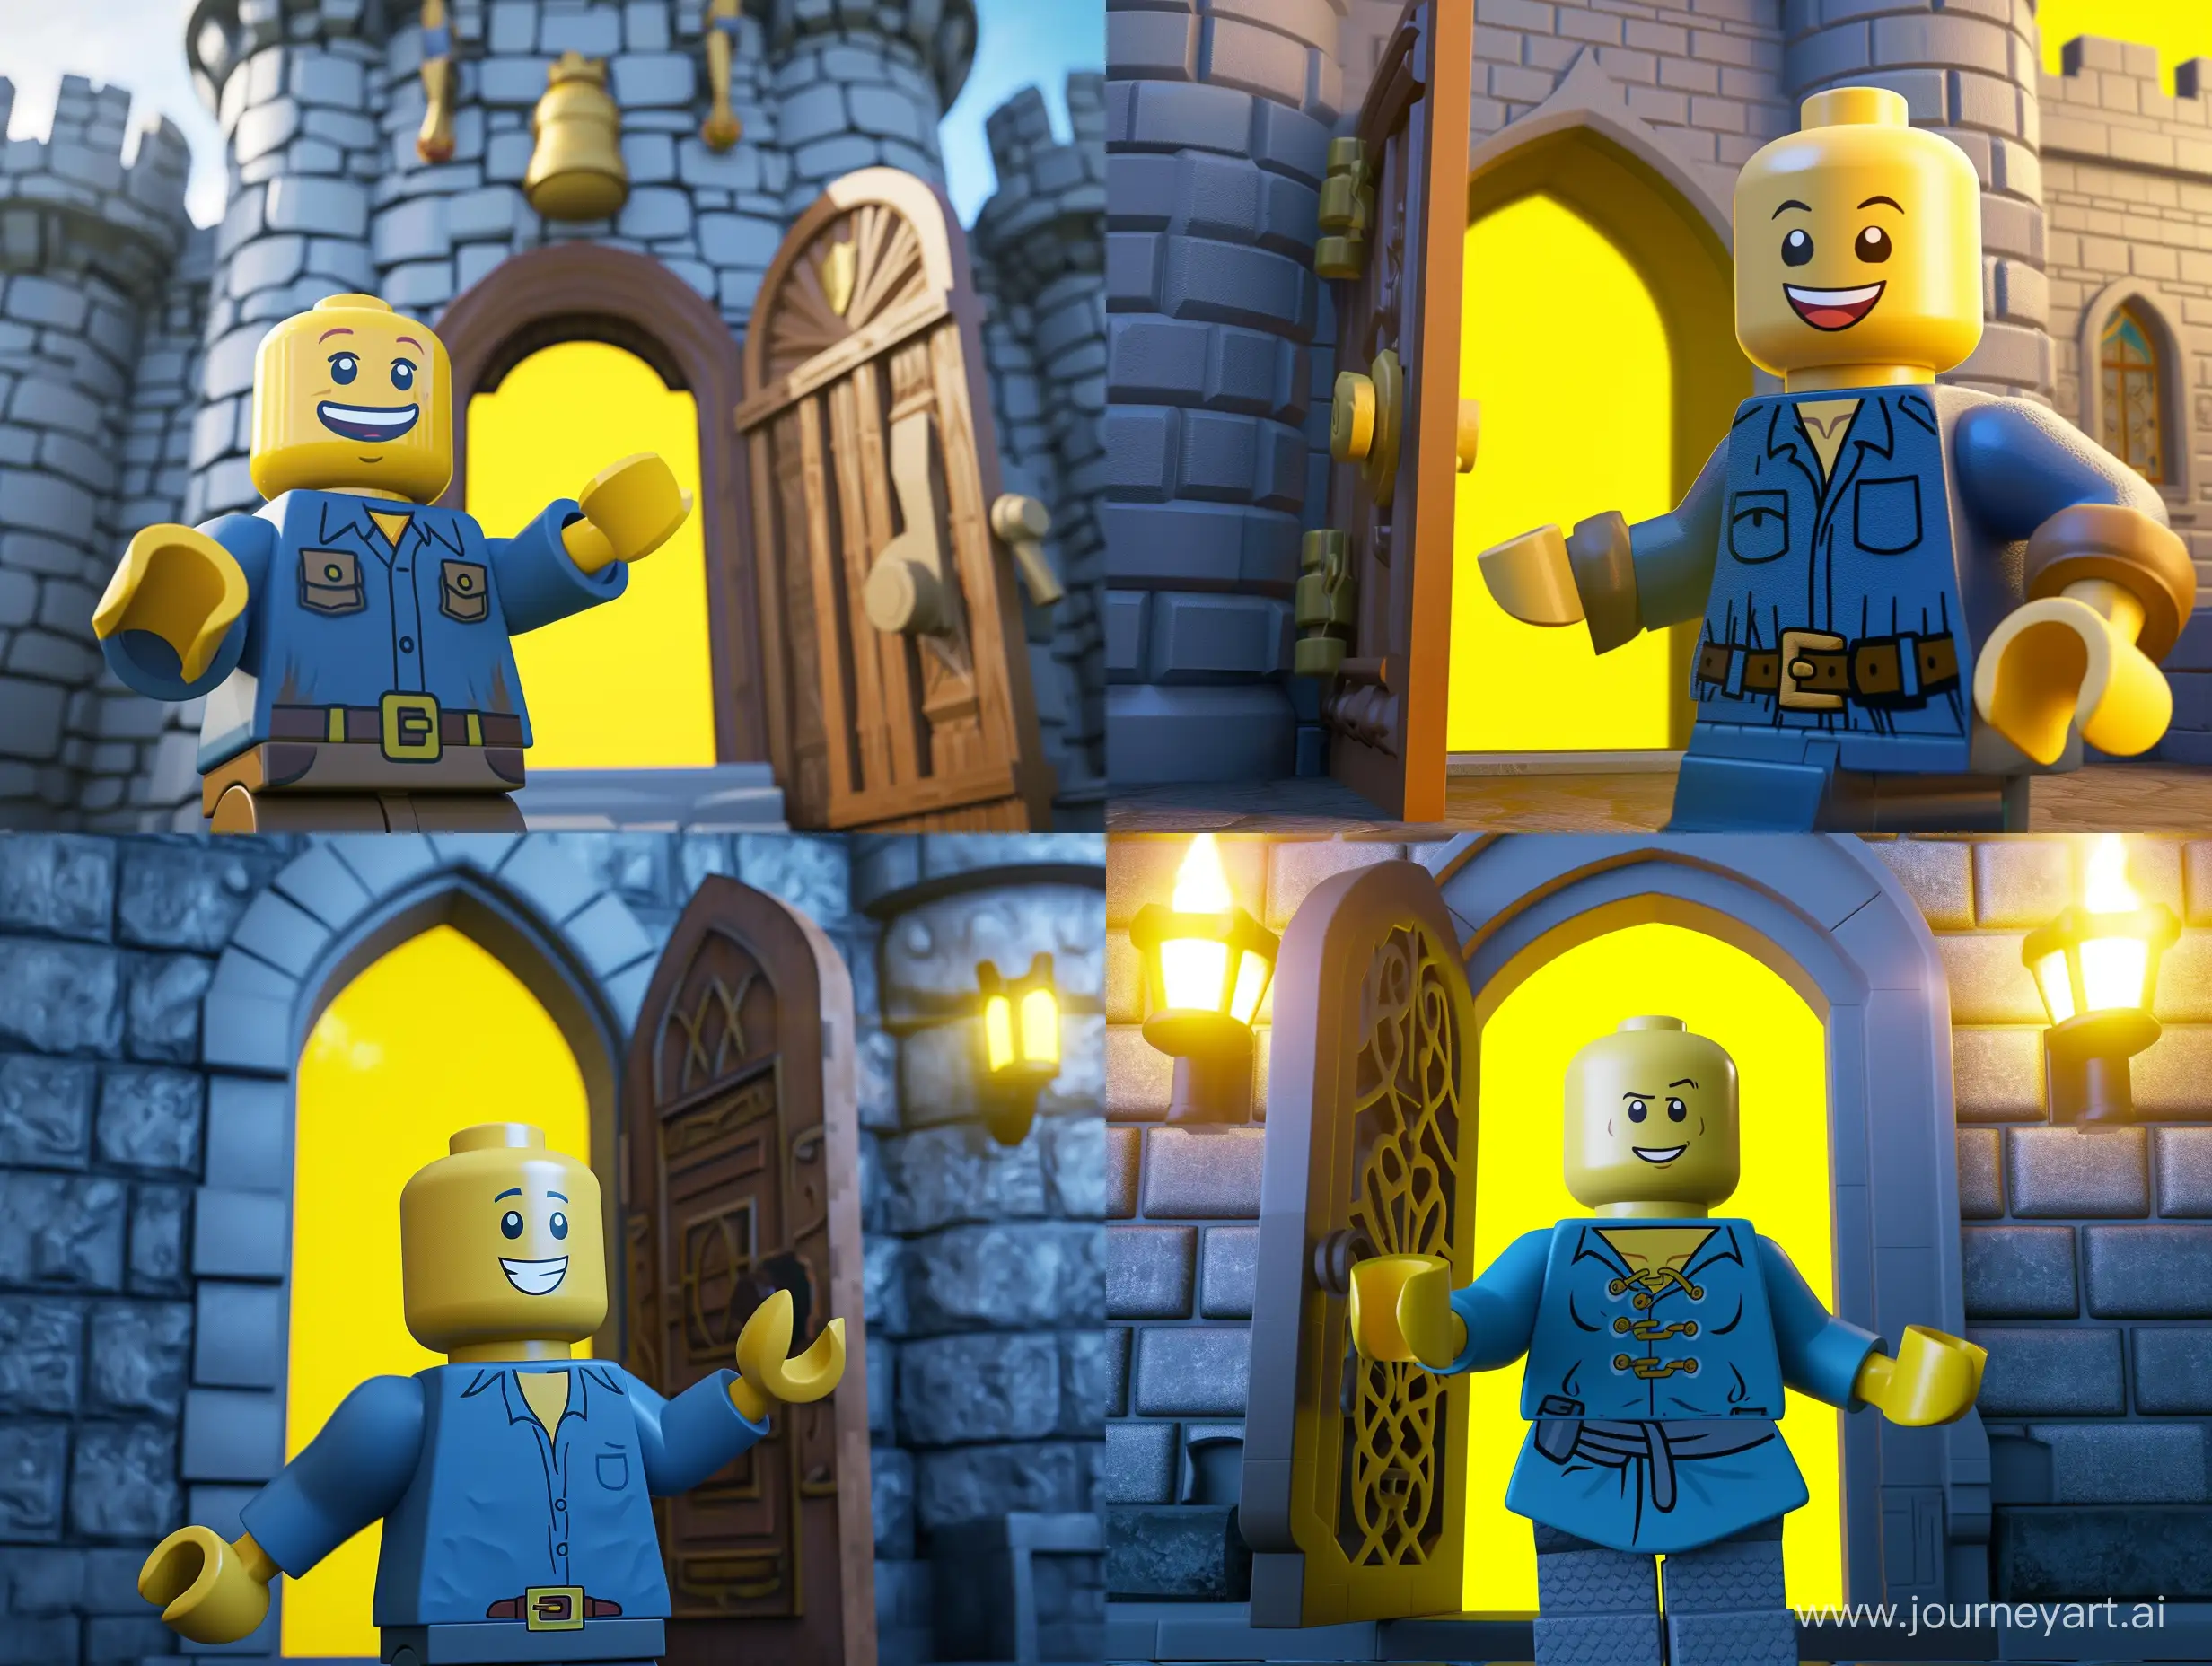 Roblox avatar with yellow skin color and has a bald and wearing a blue shirt and opening castle door with yellow BG